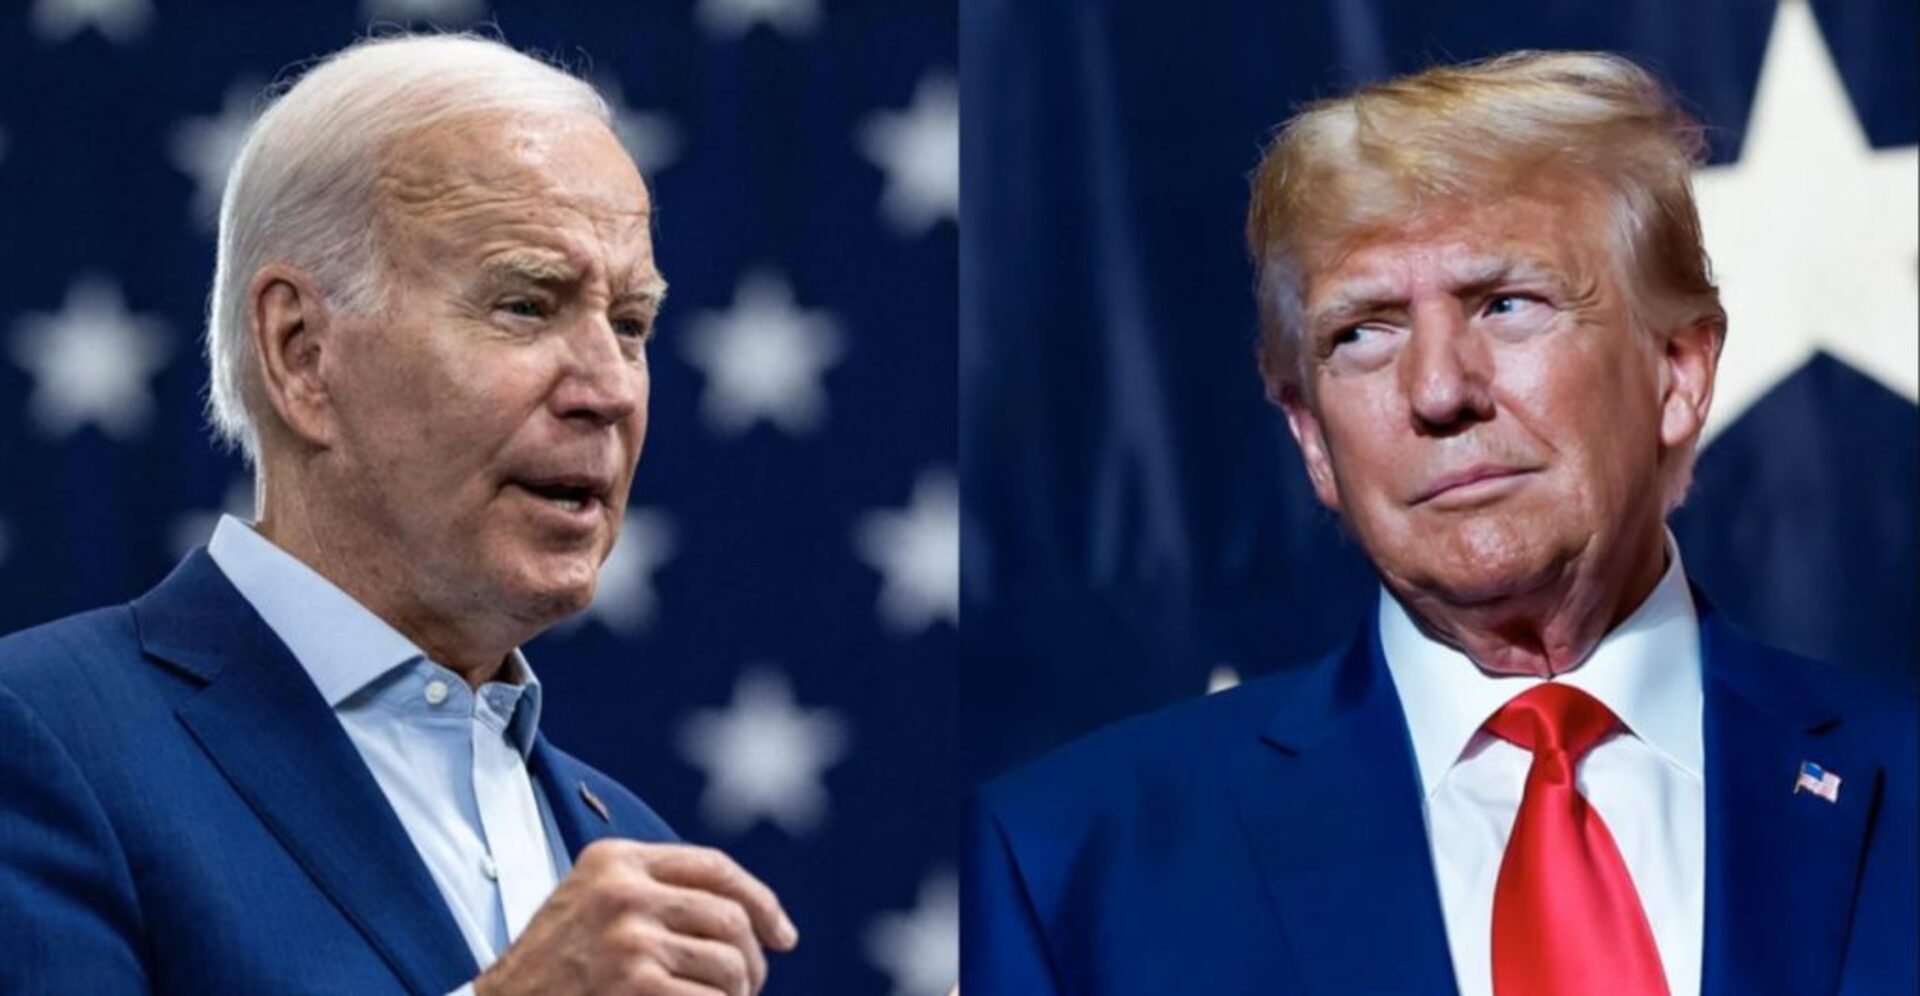 Biden and Trump ready to square off in first debate